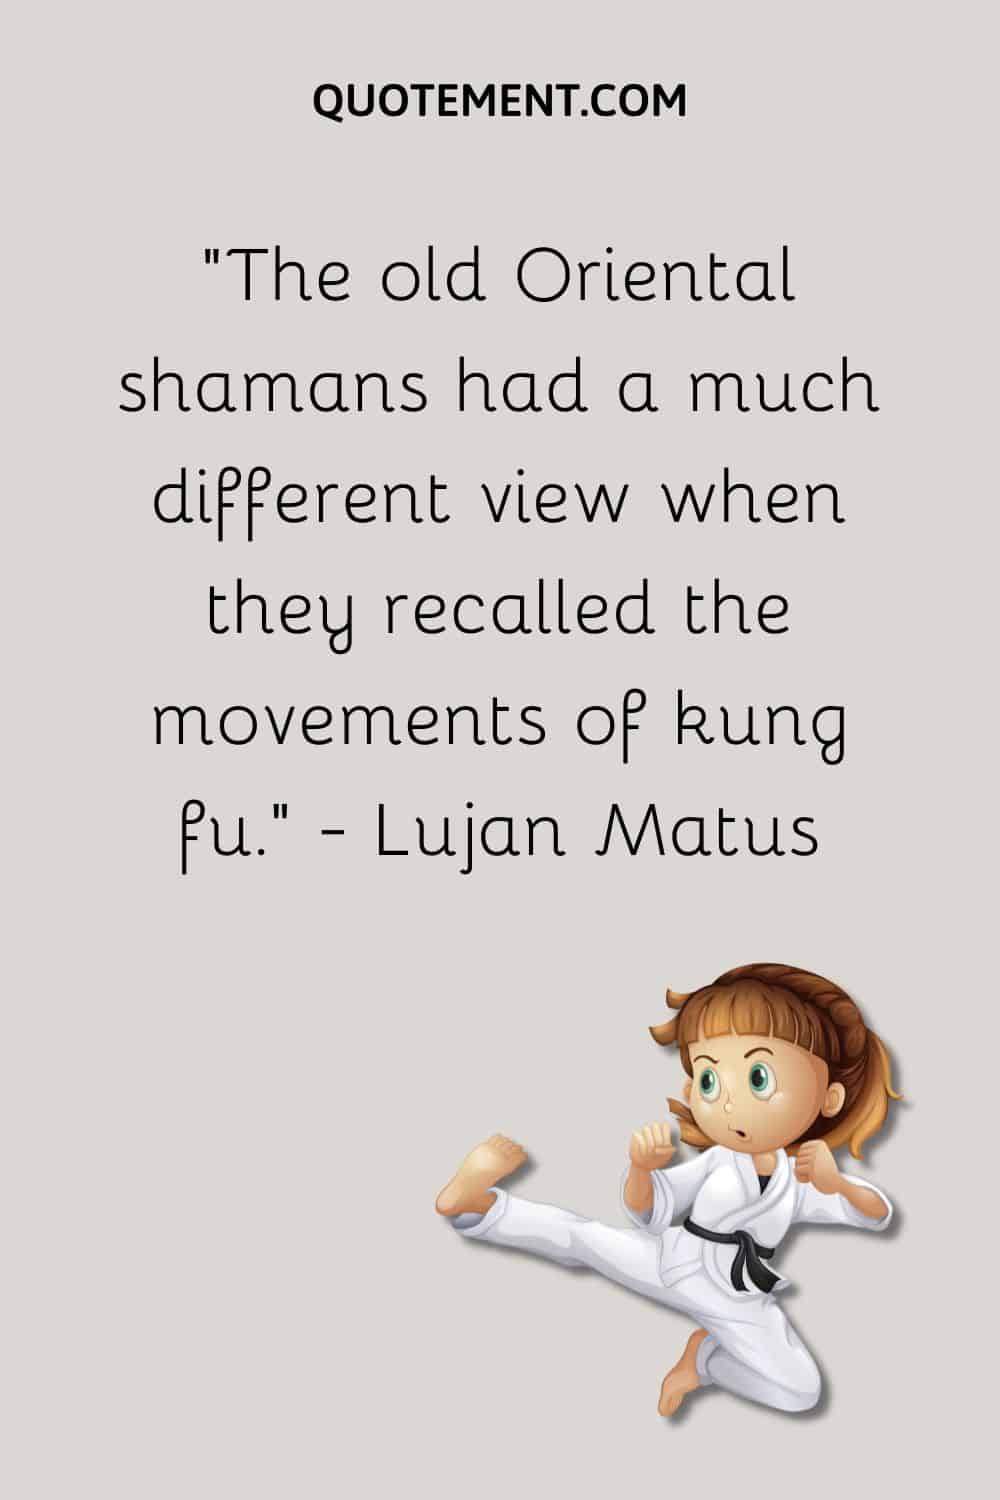 The old Oriental shamans had a much different view when they recalled the movements of kung fu